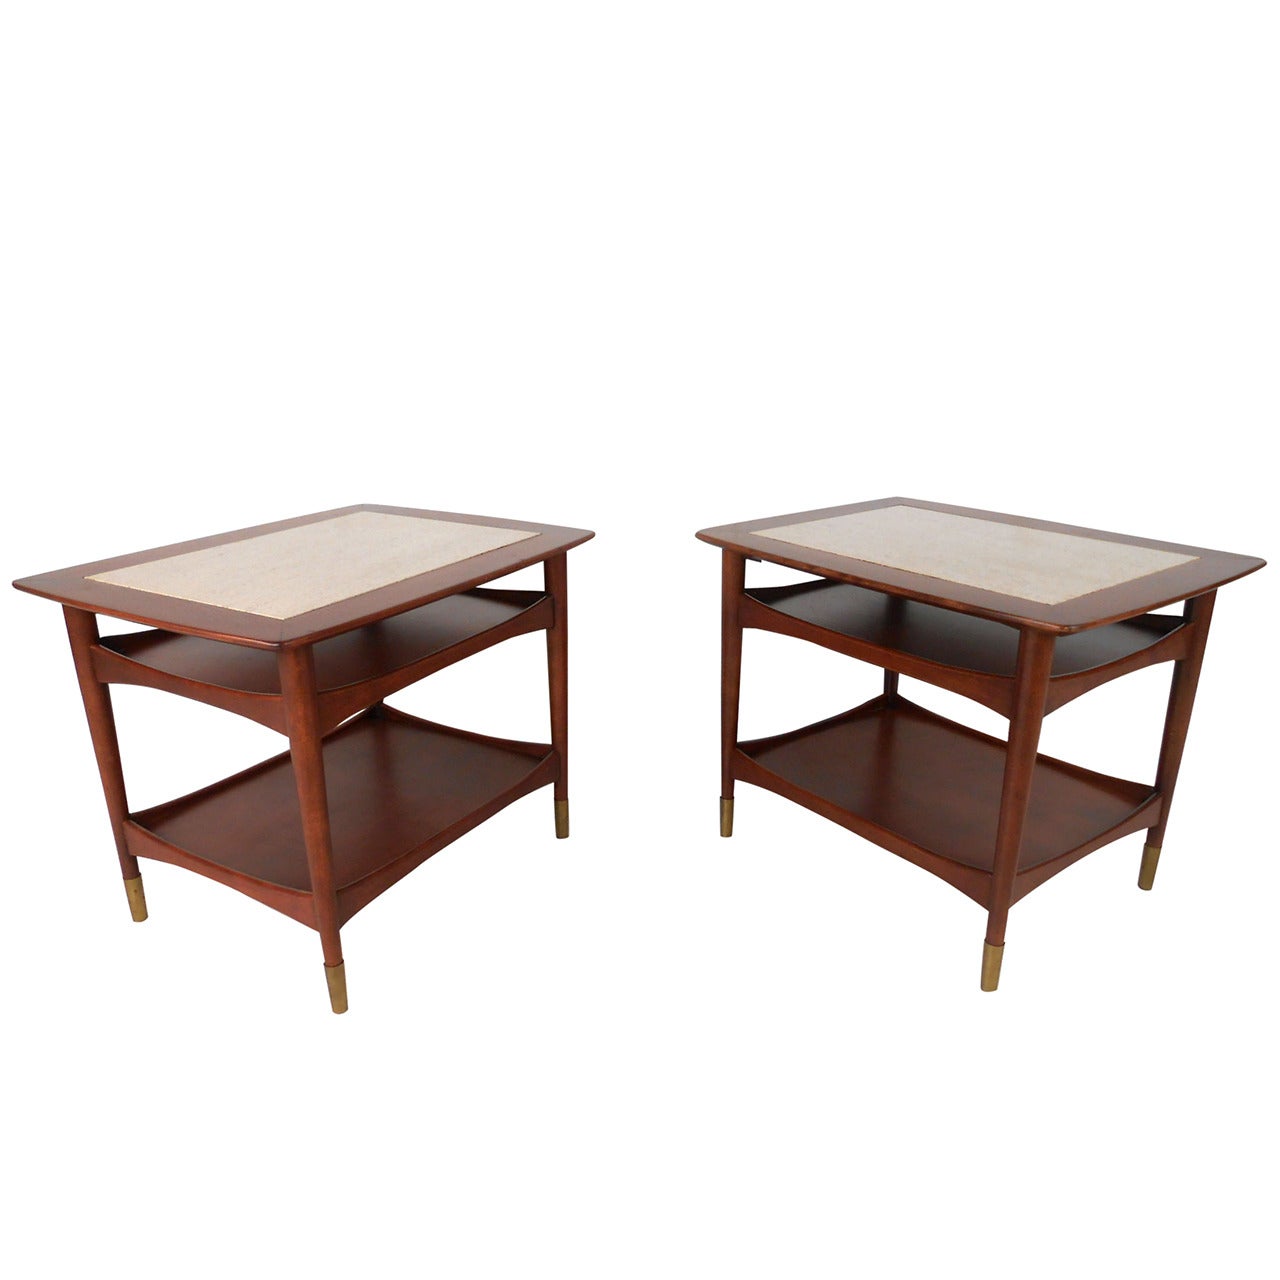 Unique Mid-Century Modern Walnut and Marble Side Tables